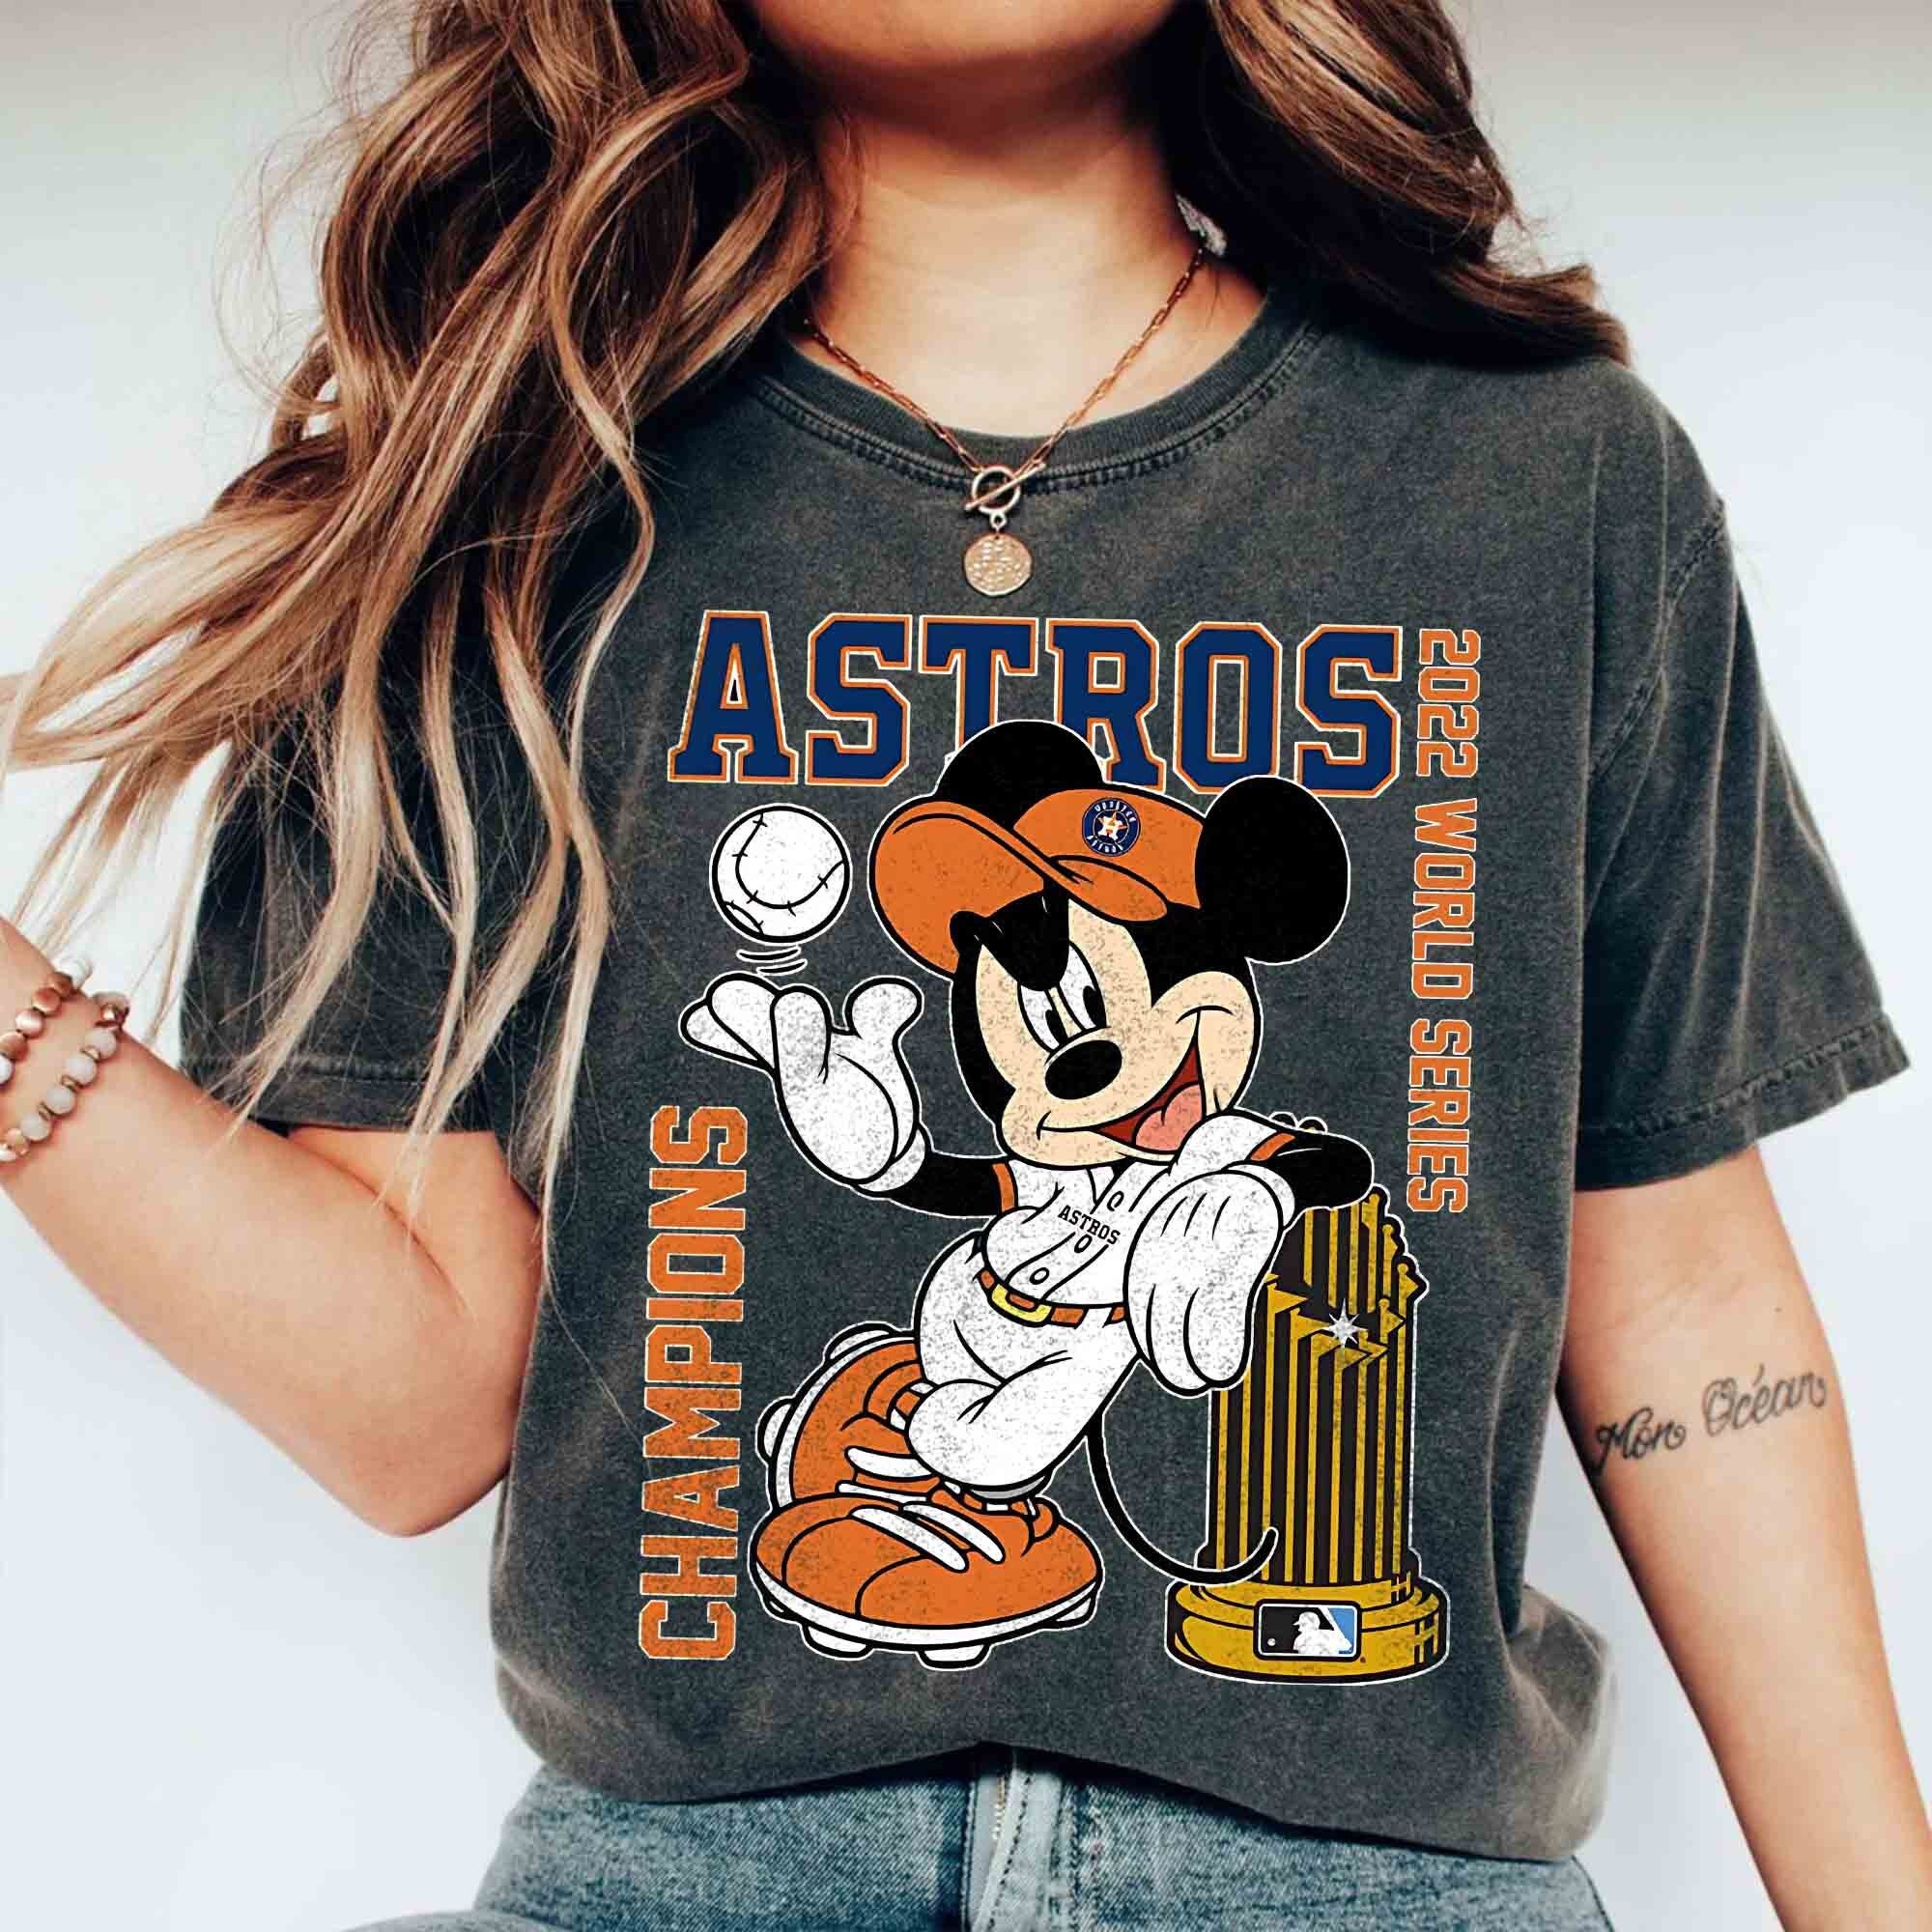 Mickey Mouse Houston Astros 2022 World Series Champions Shirt